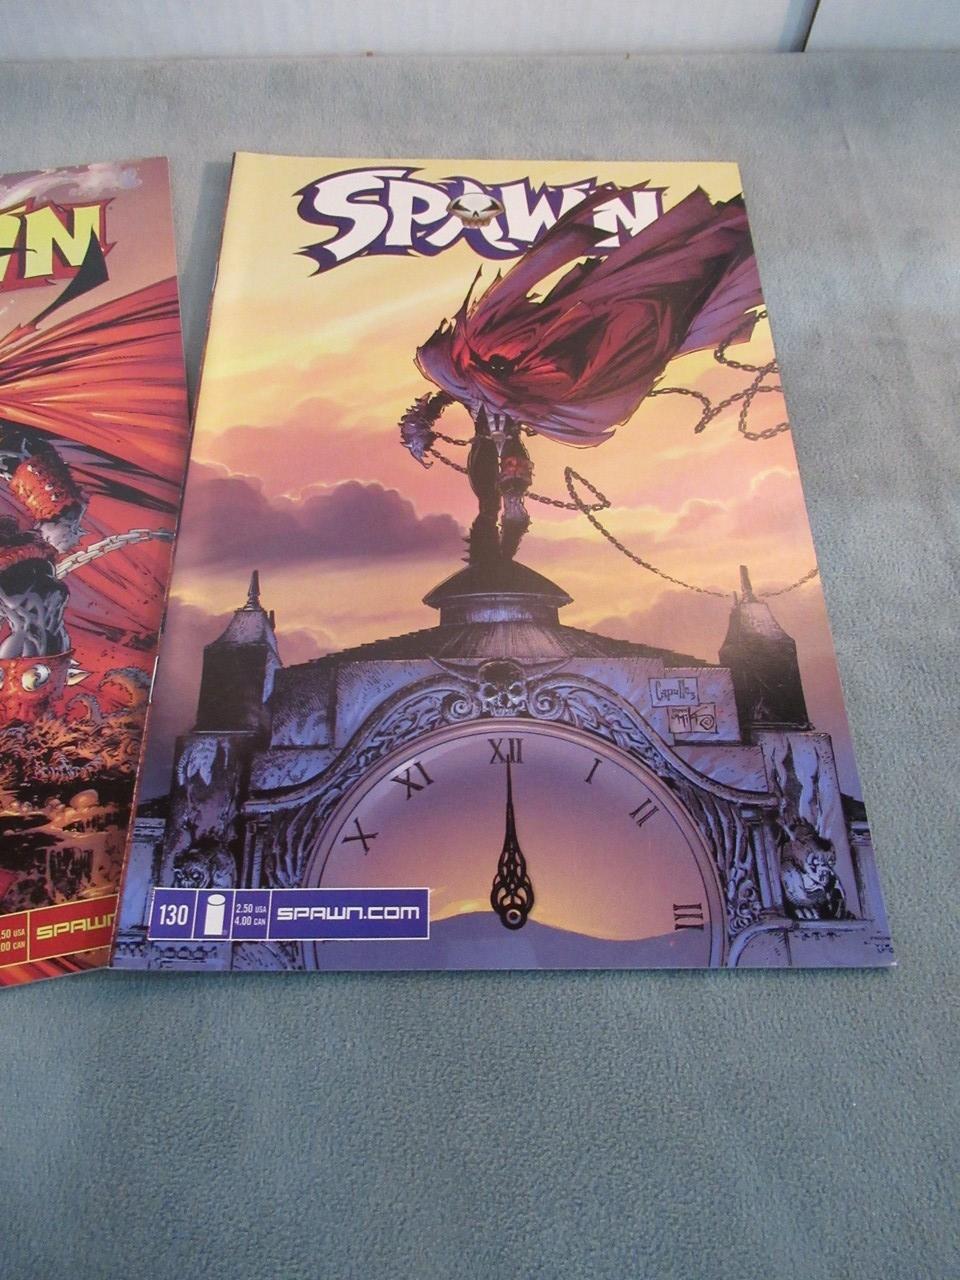 Spawn #130 and 133